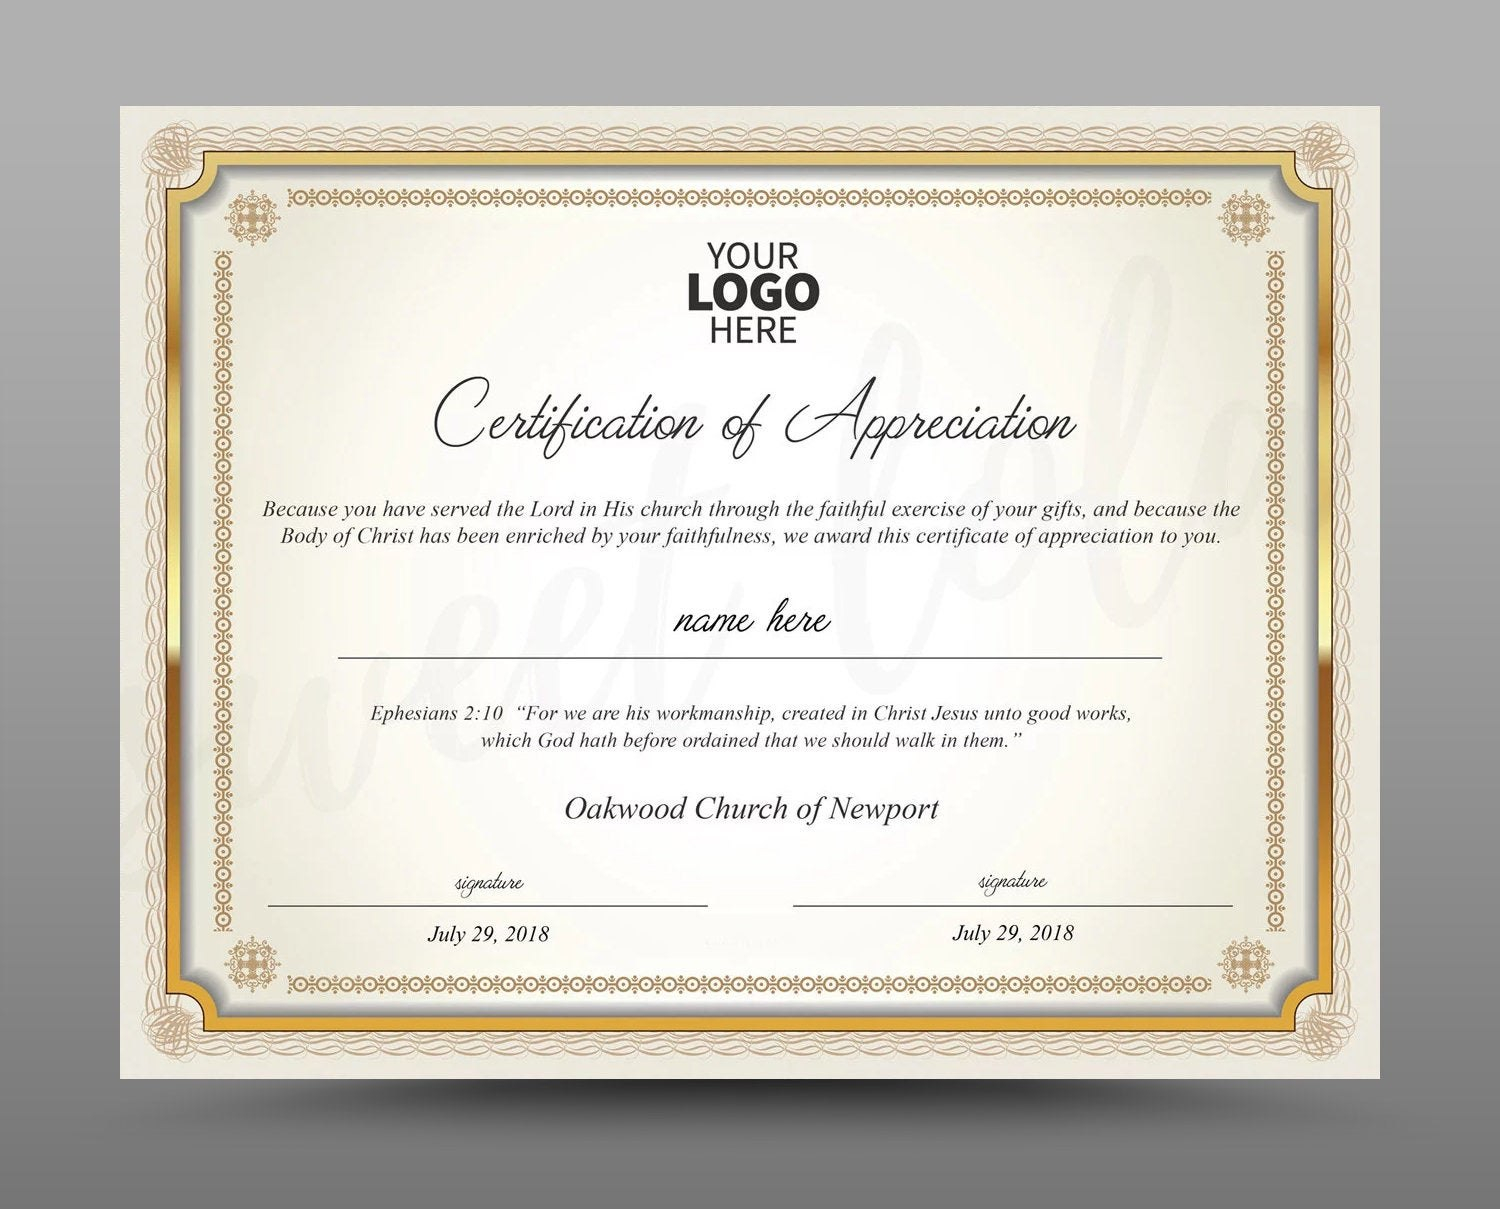 Certificate Template Instant Download Certificate Of  Etsy pertaining to Commemorative Certificate Template